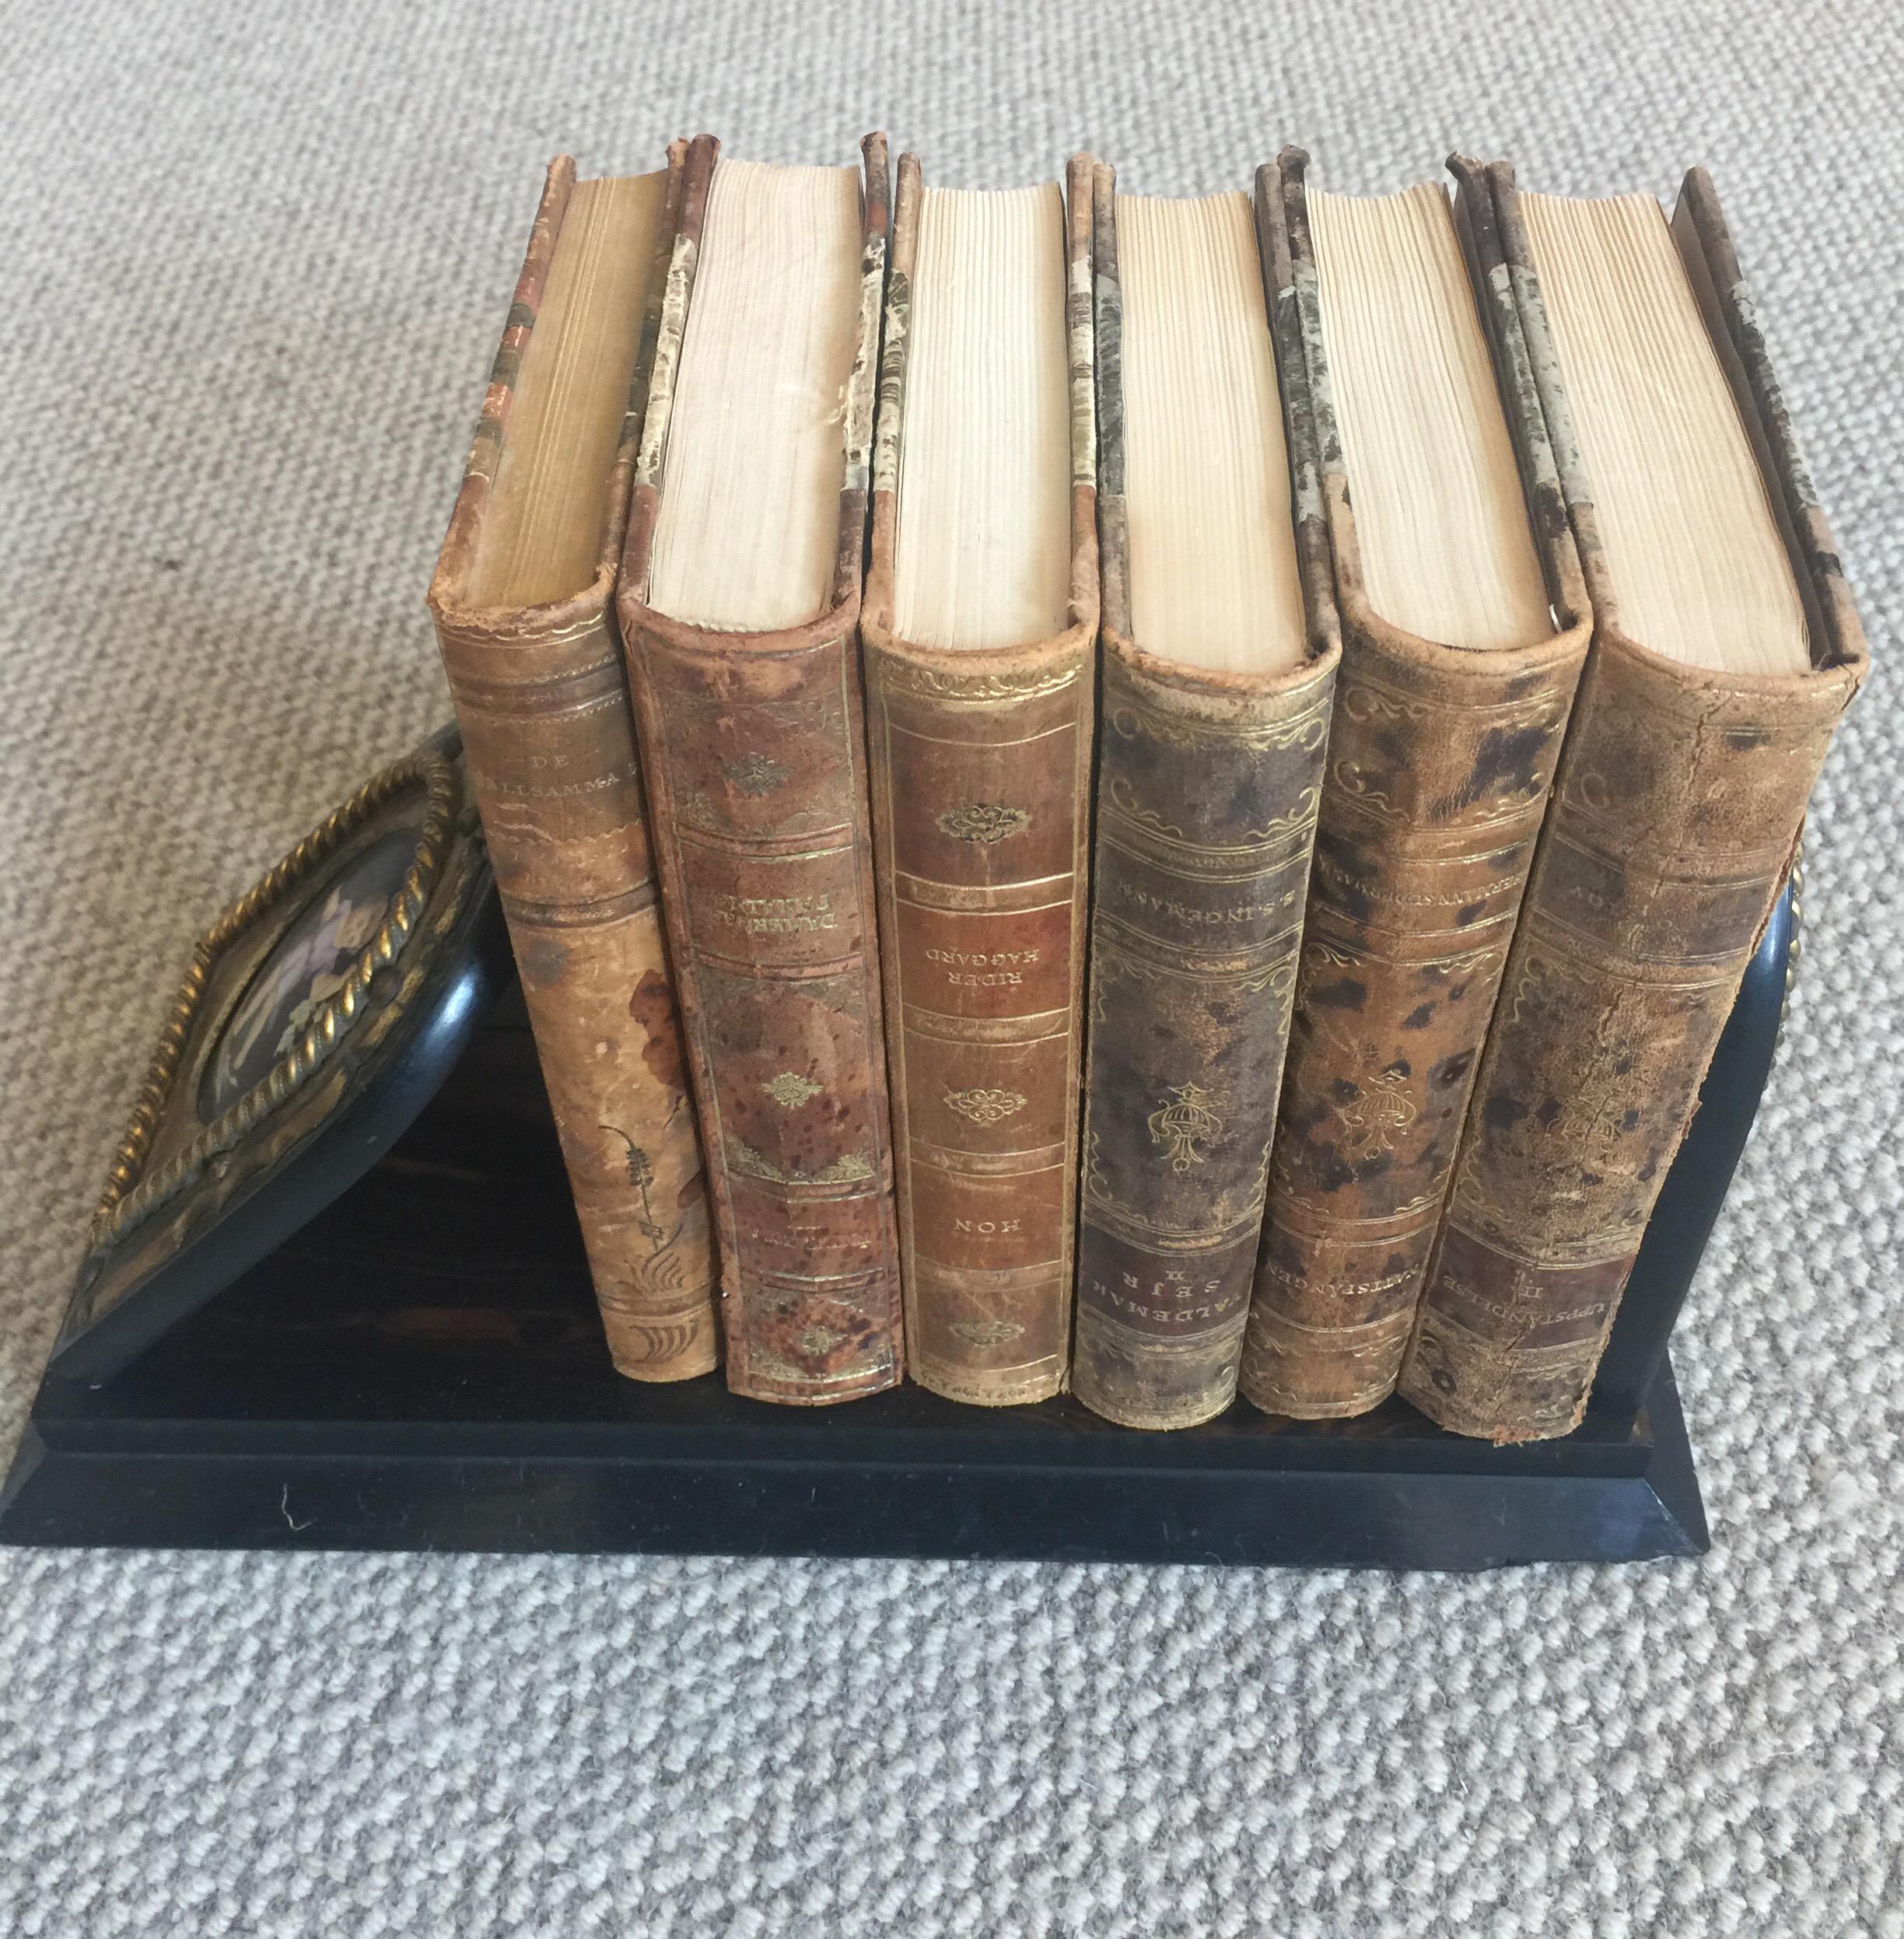 A beautiful Victorian brass-mounted coromandel book rack with inset hand painted cherub porcelain plaques. Brass retailers plate for 